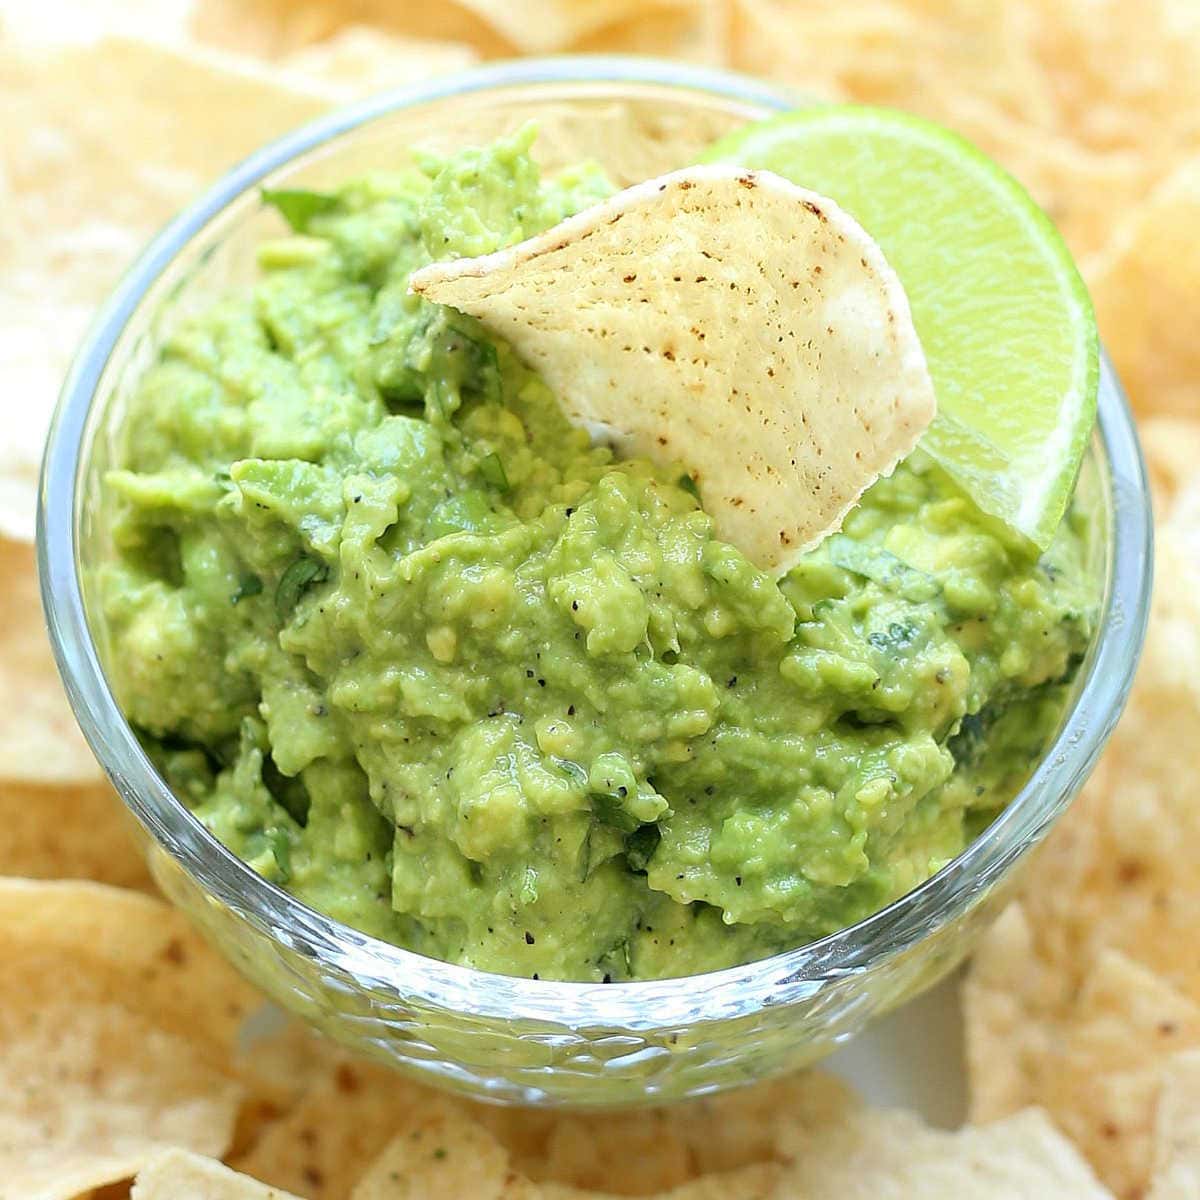 Creamy Homemade Guacamole in a Salsa Dish with Chips.